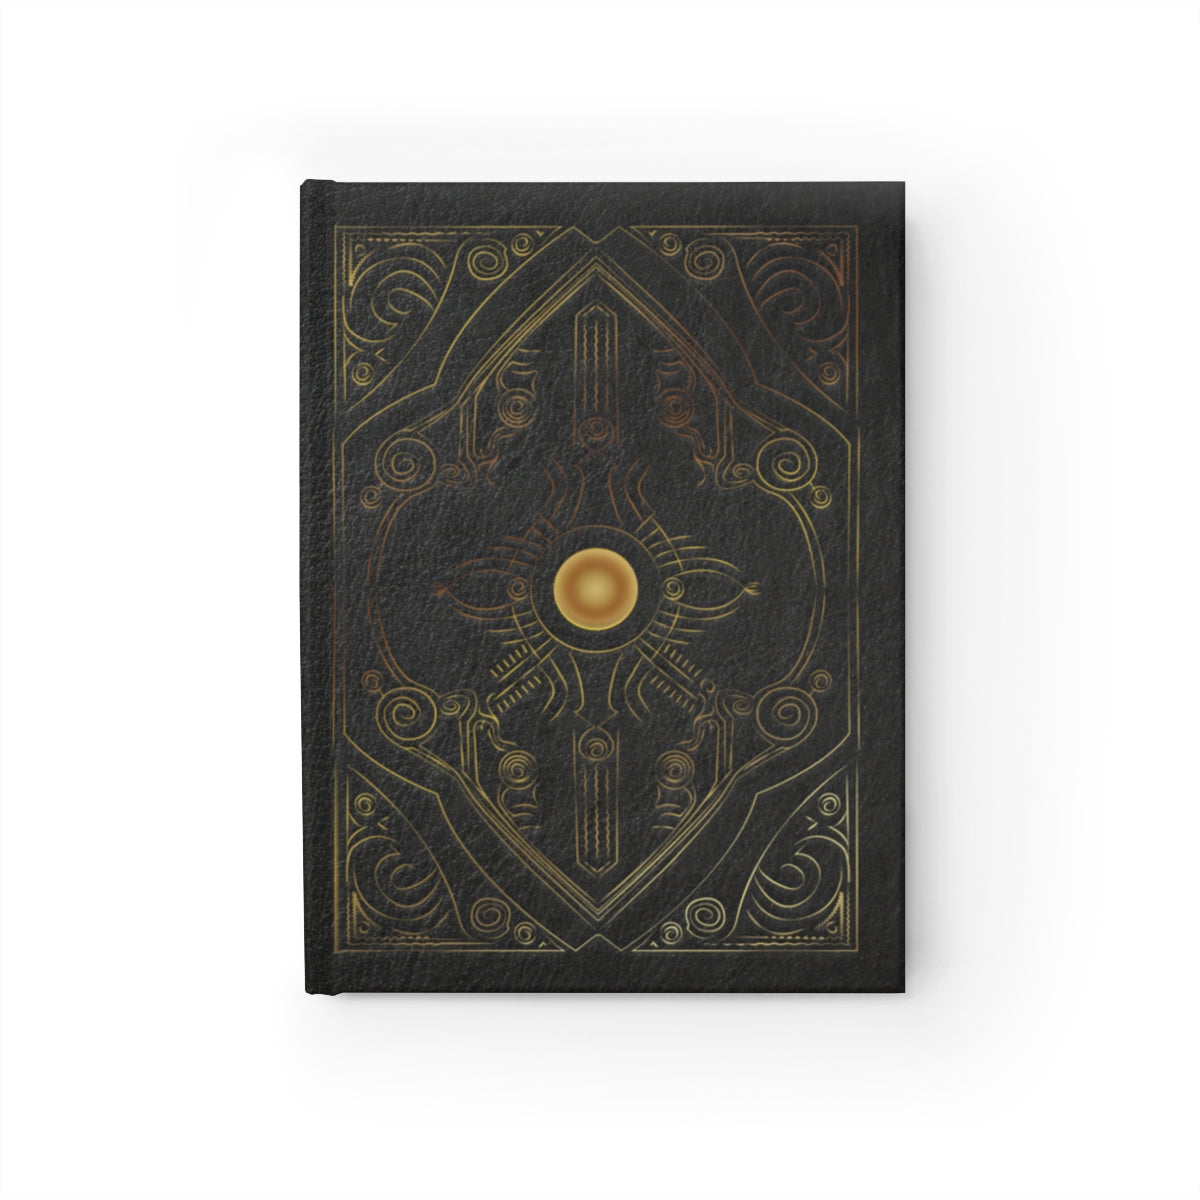 Black Ocean: Tome of Bleeding Thoughts journal - ruled